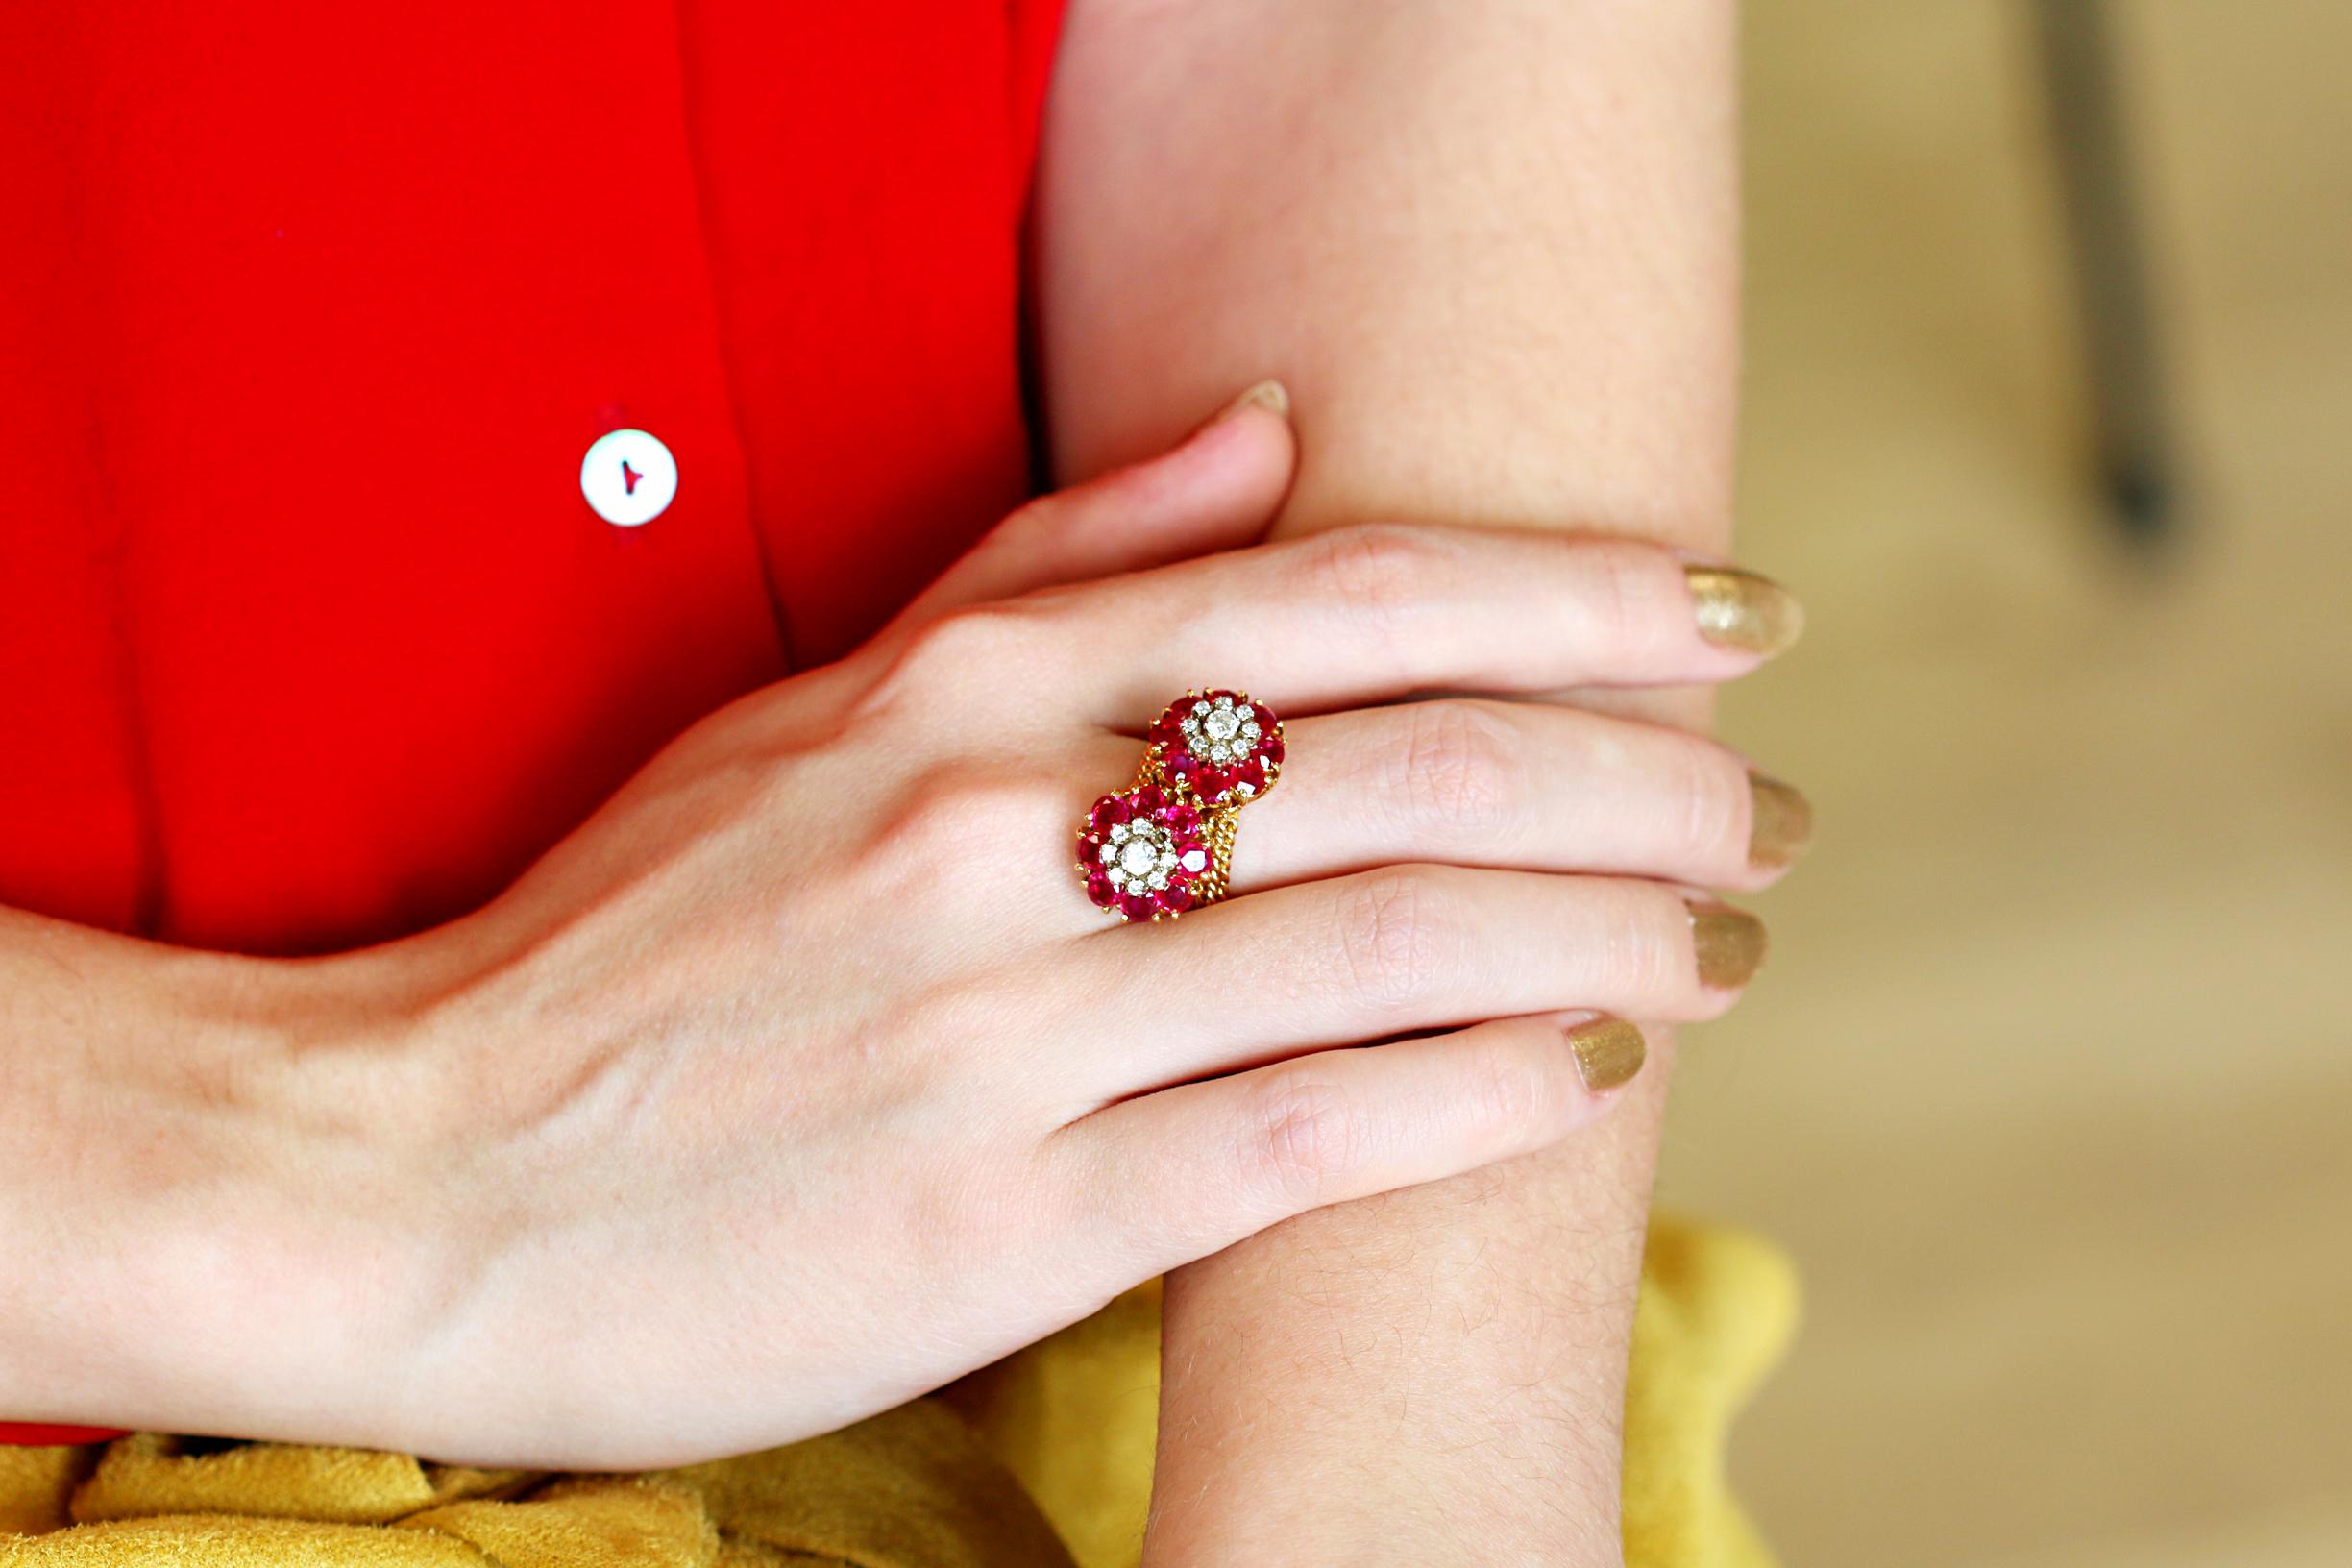 This stunning ring is made up of two flower-shaped clusters. The lovely rubies are the petals around the diamond centres and give the impression of a little posy on your finger. 

The ring over all has a pleasing heft to it and the mass of ruby red